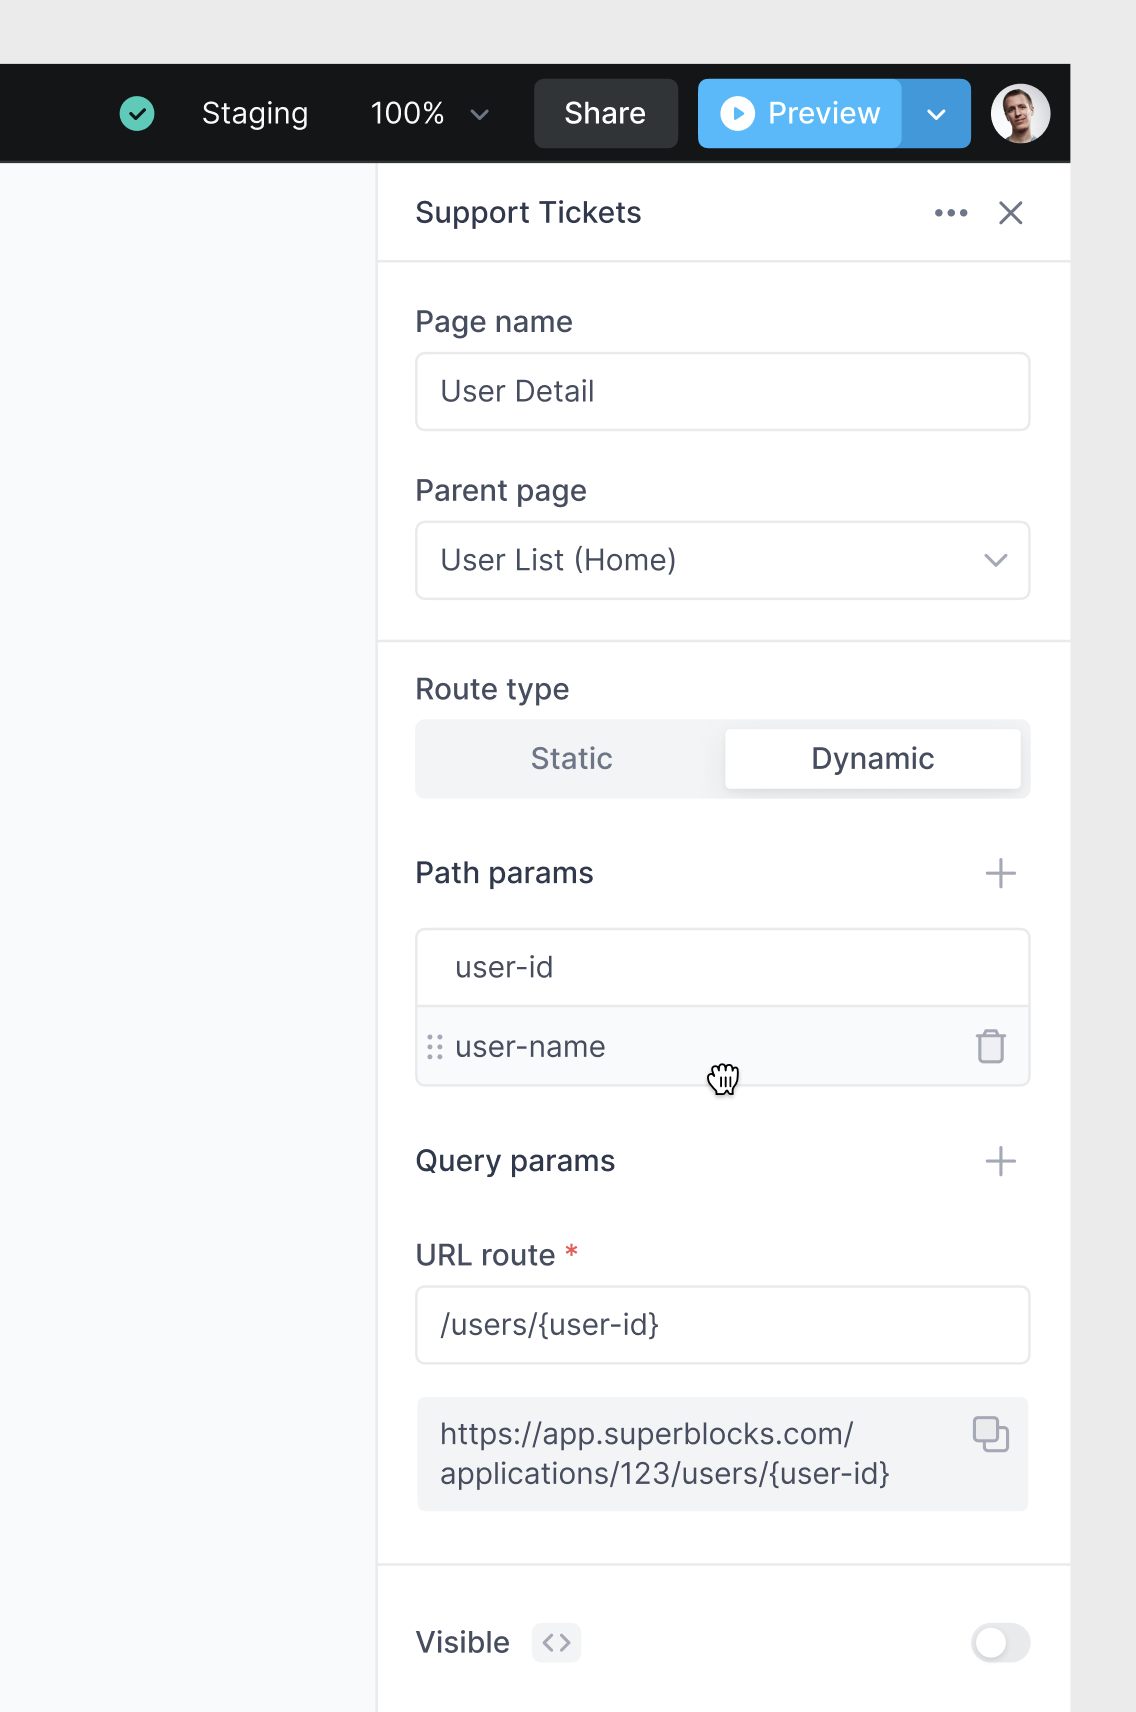 Configure the details for your new page from the properties panel